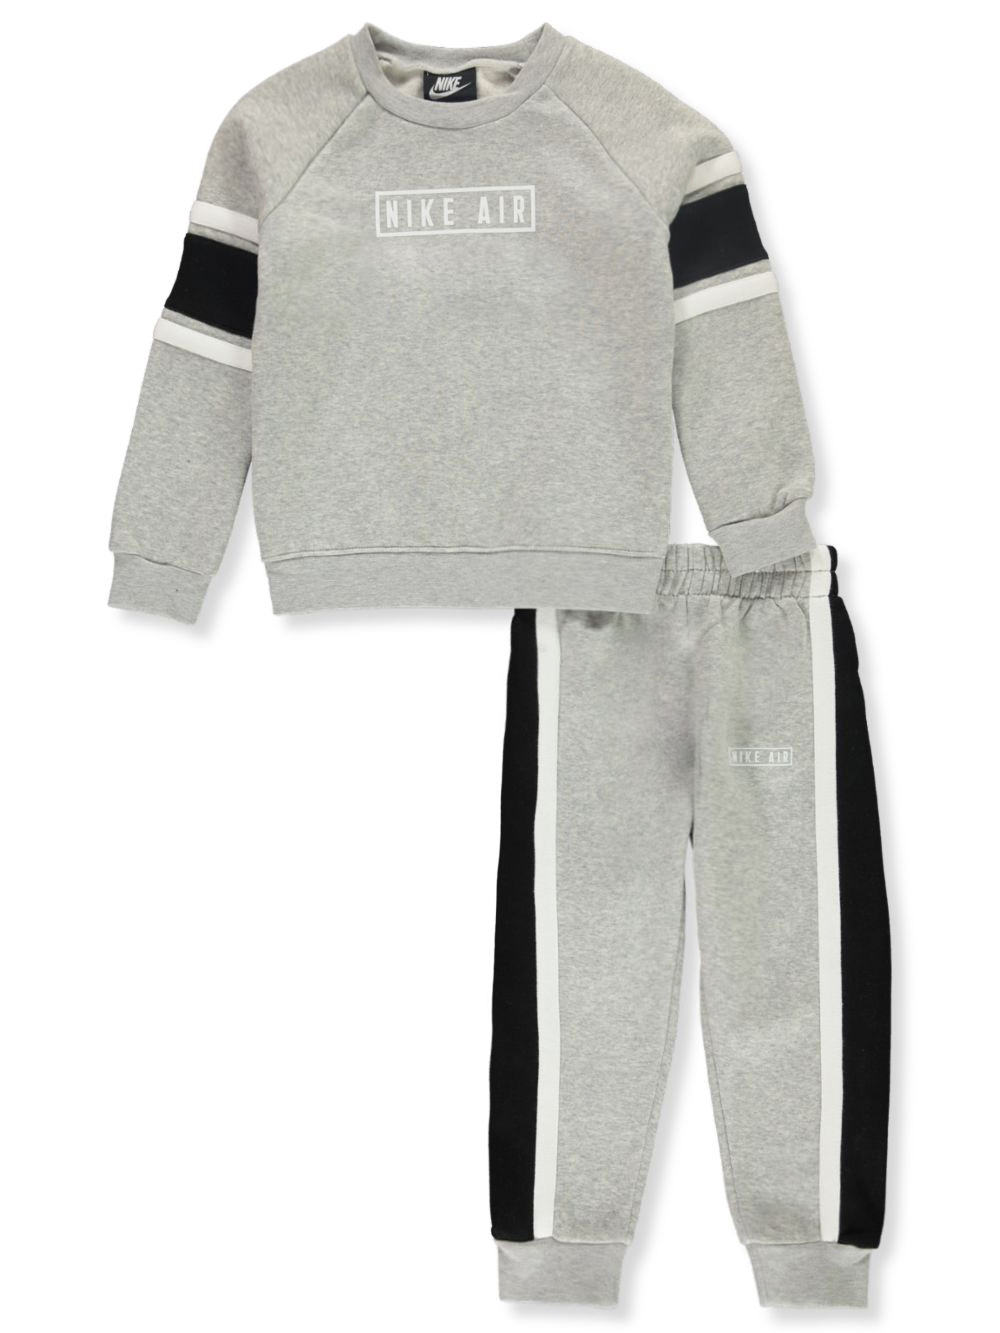 nike jogger outfit